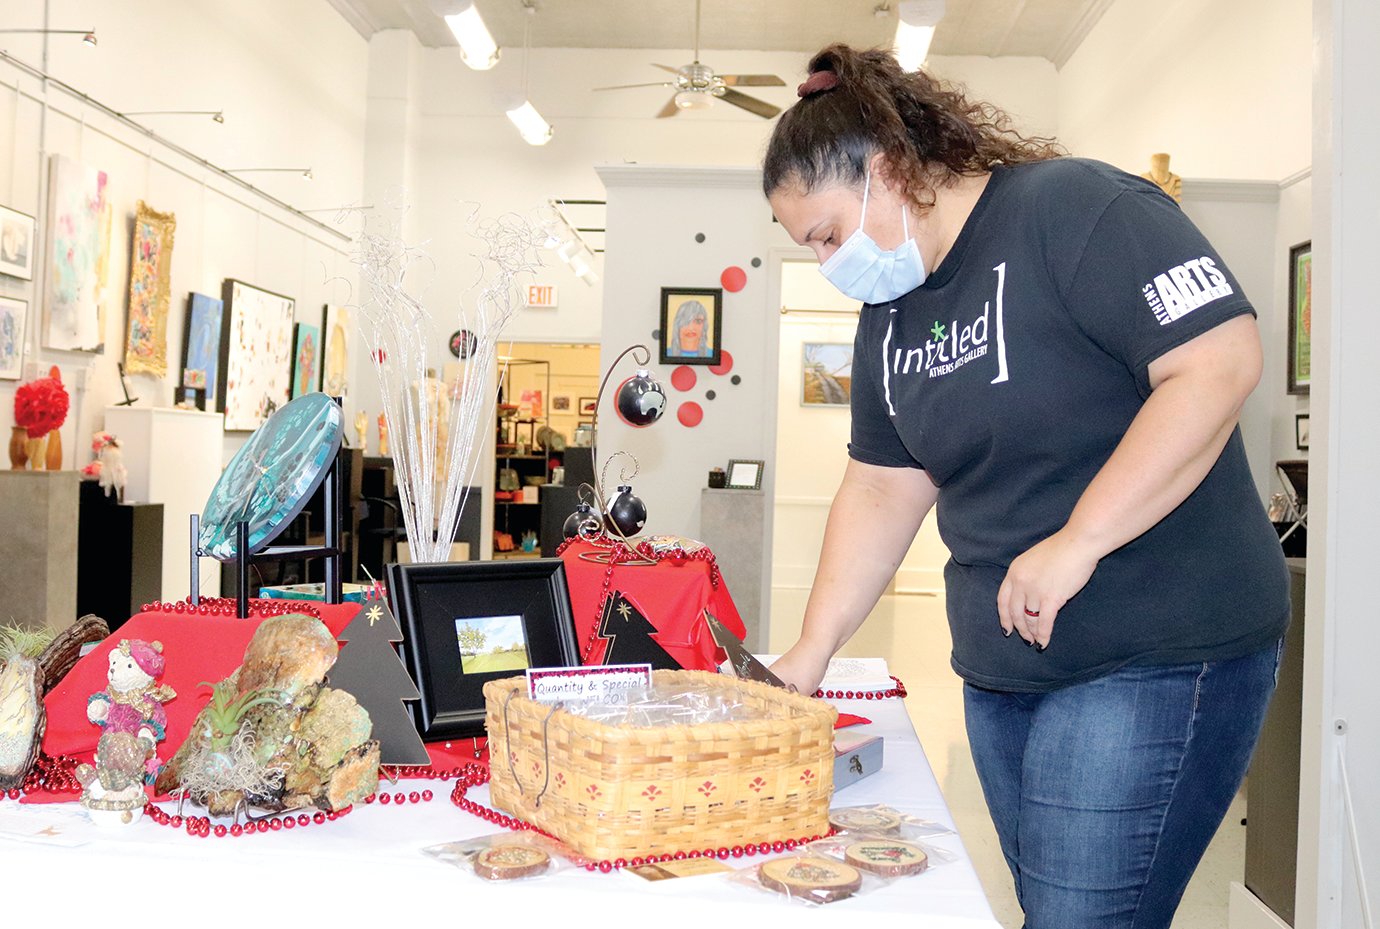 Local artist Kenya Ott arranges holiday displays and sale items Friday at Athens Arts Gallery downtown.